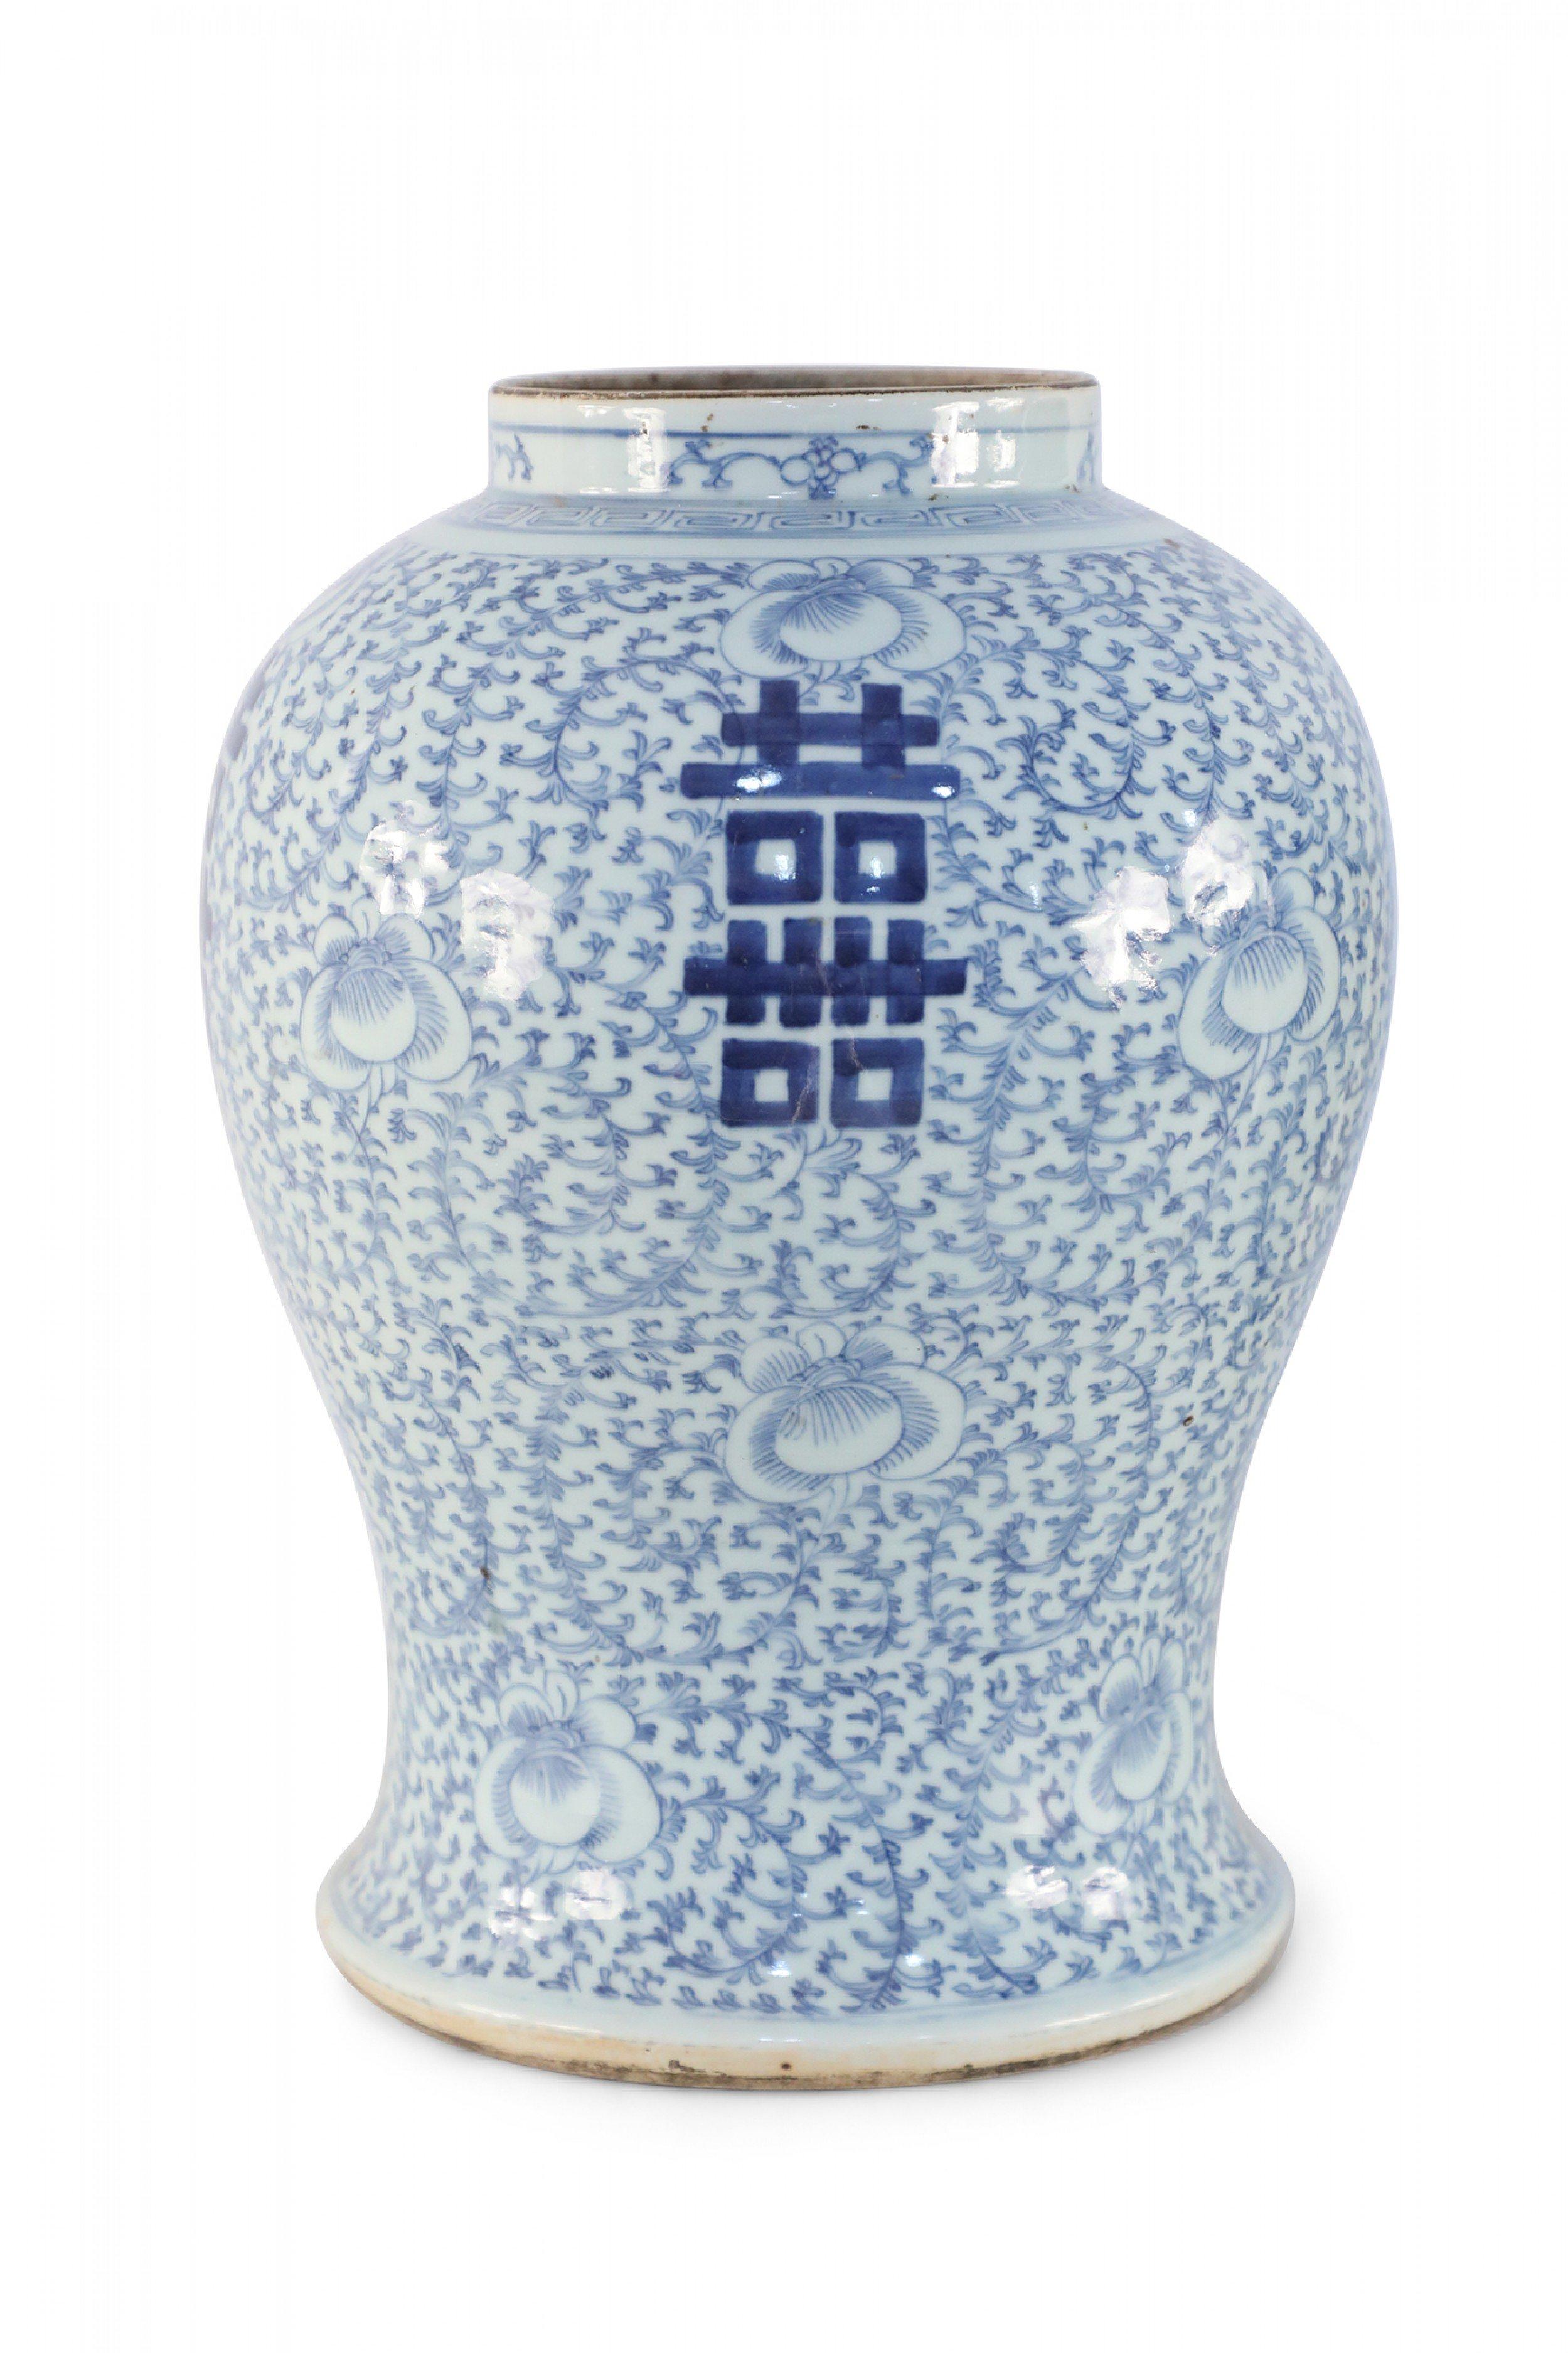 Antique Chinese (Early 20th Century) off-white porcelain vase with an urn form decorated in a light blue, delicate vine and floral motifs and bold characters on 4 sides.
 